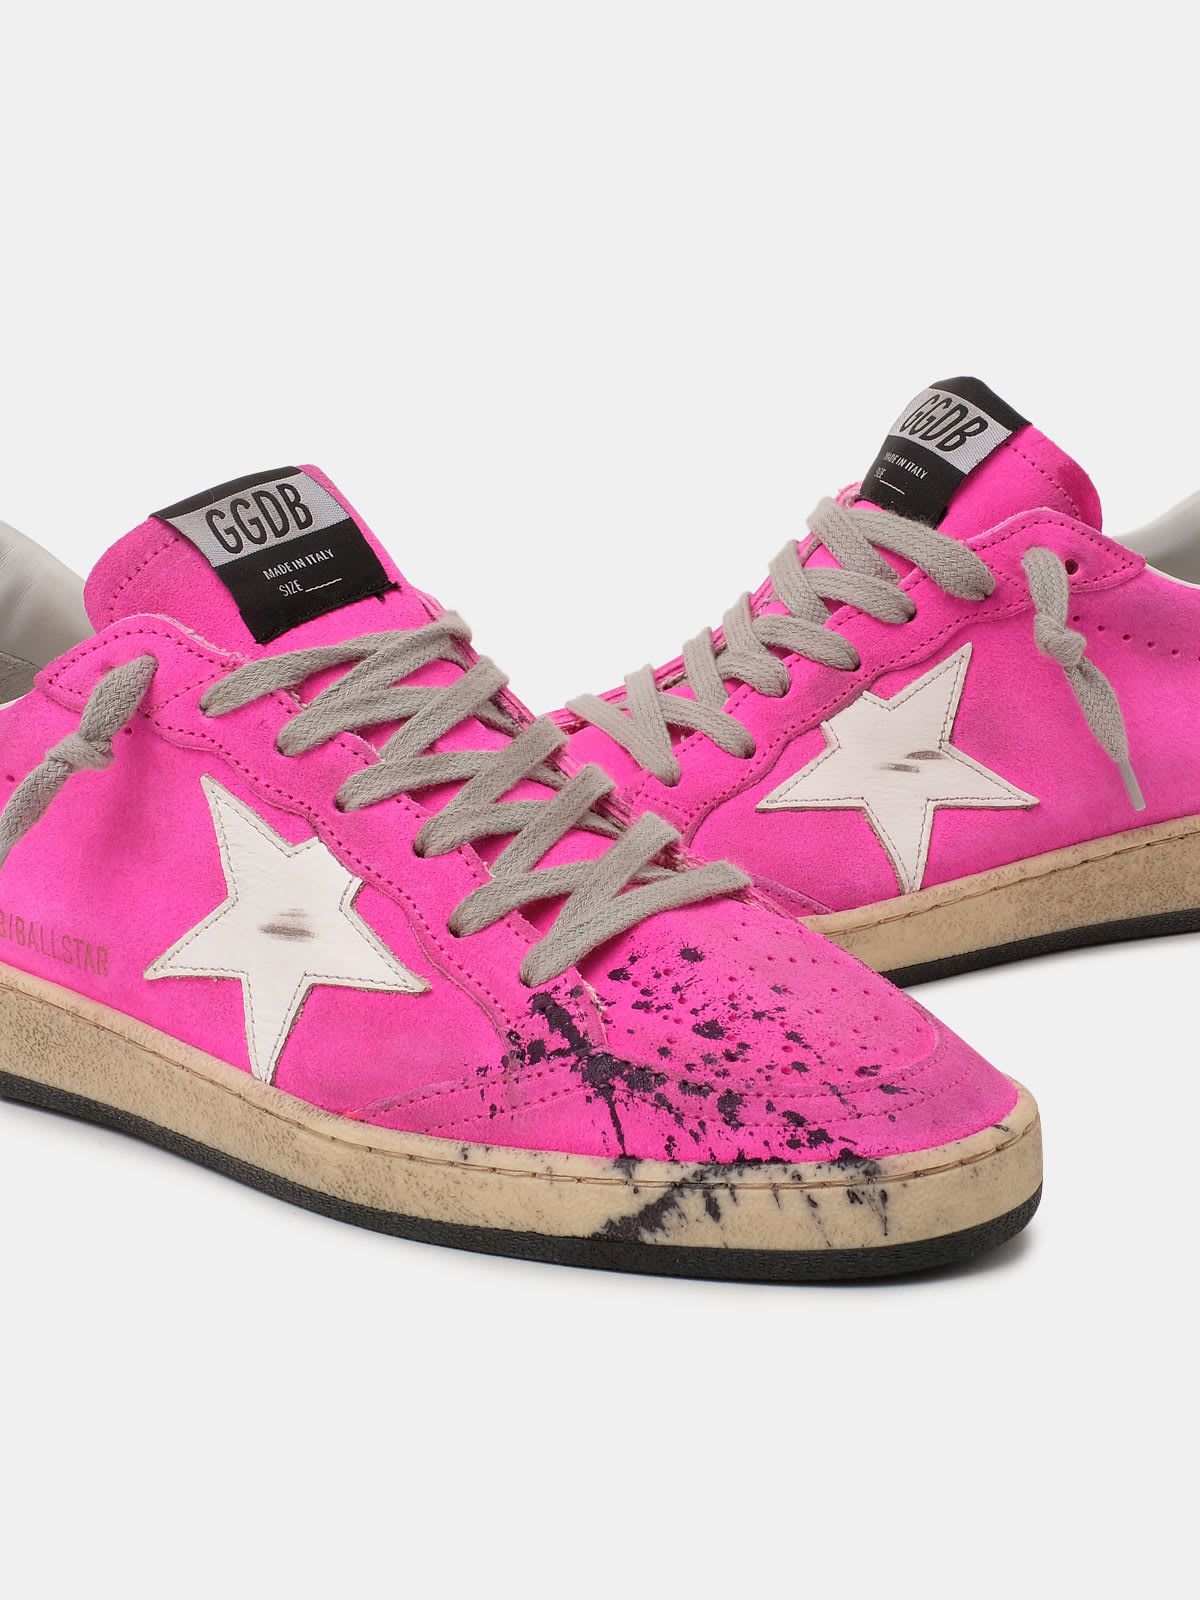 Ball Star sneakers in fuchsia leather with splashes of colour